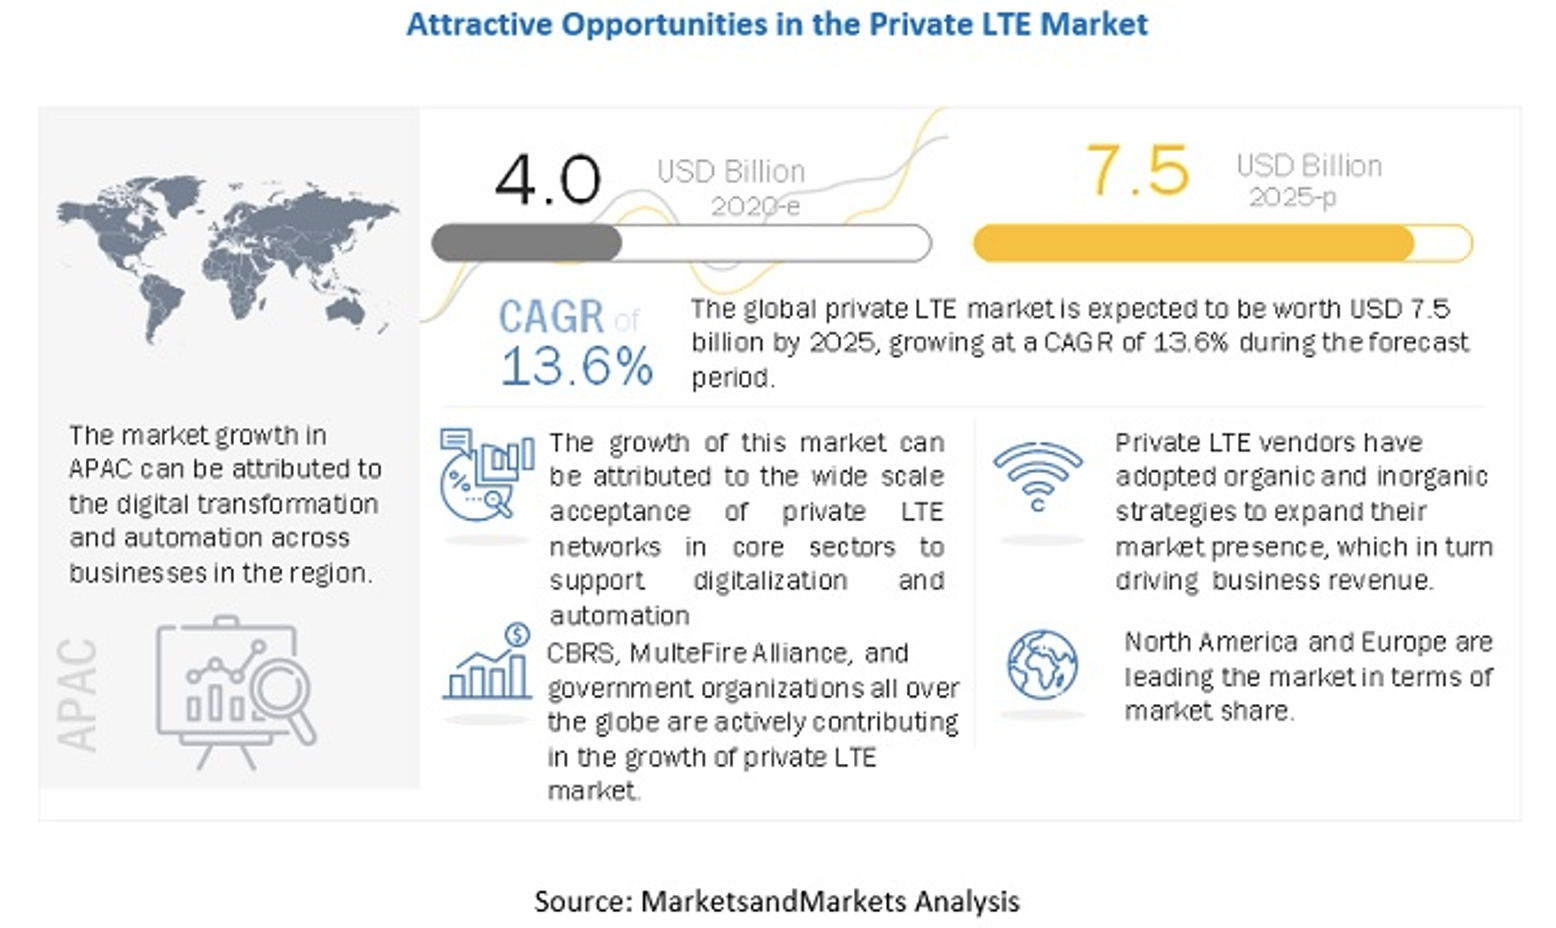 Attractive Opportunities in the Private LTE Market